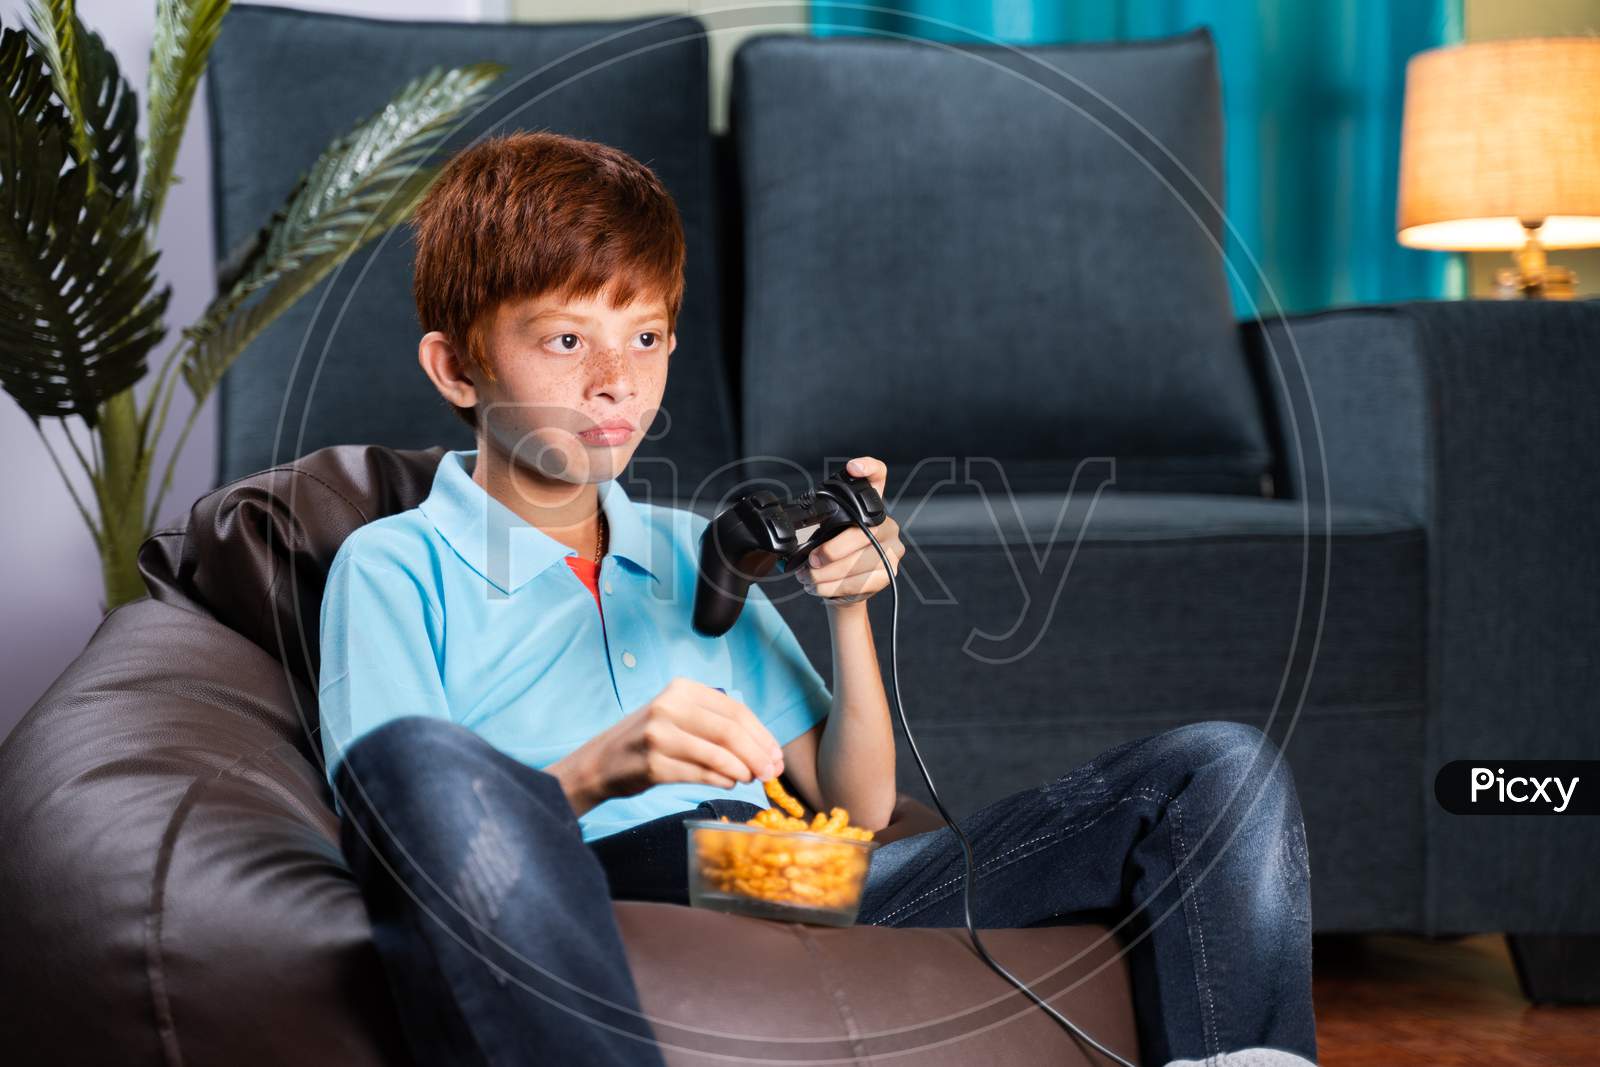 Kid Sitting On Bean Bag Seriously Playing Video Game While Eating Chips At Home During Leisure Time - Concept Of Kids Game Concentration And Lifestyle.